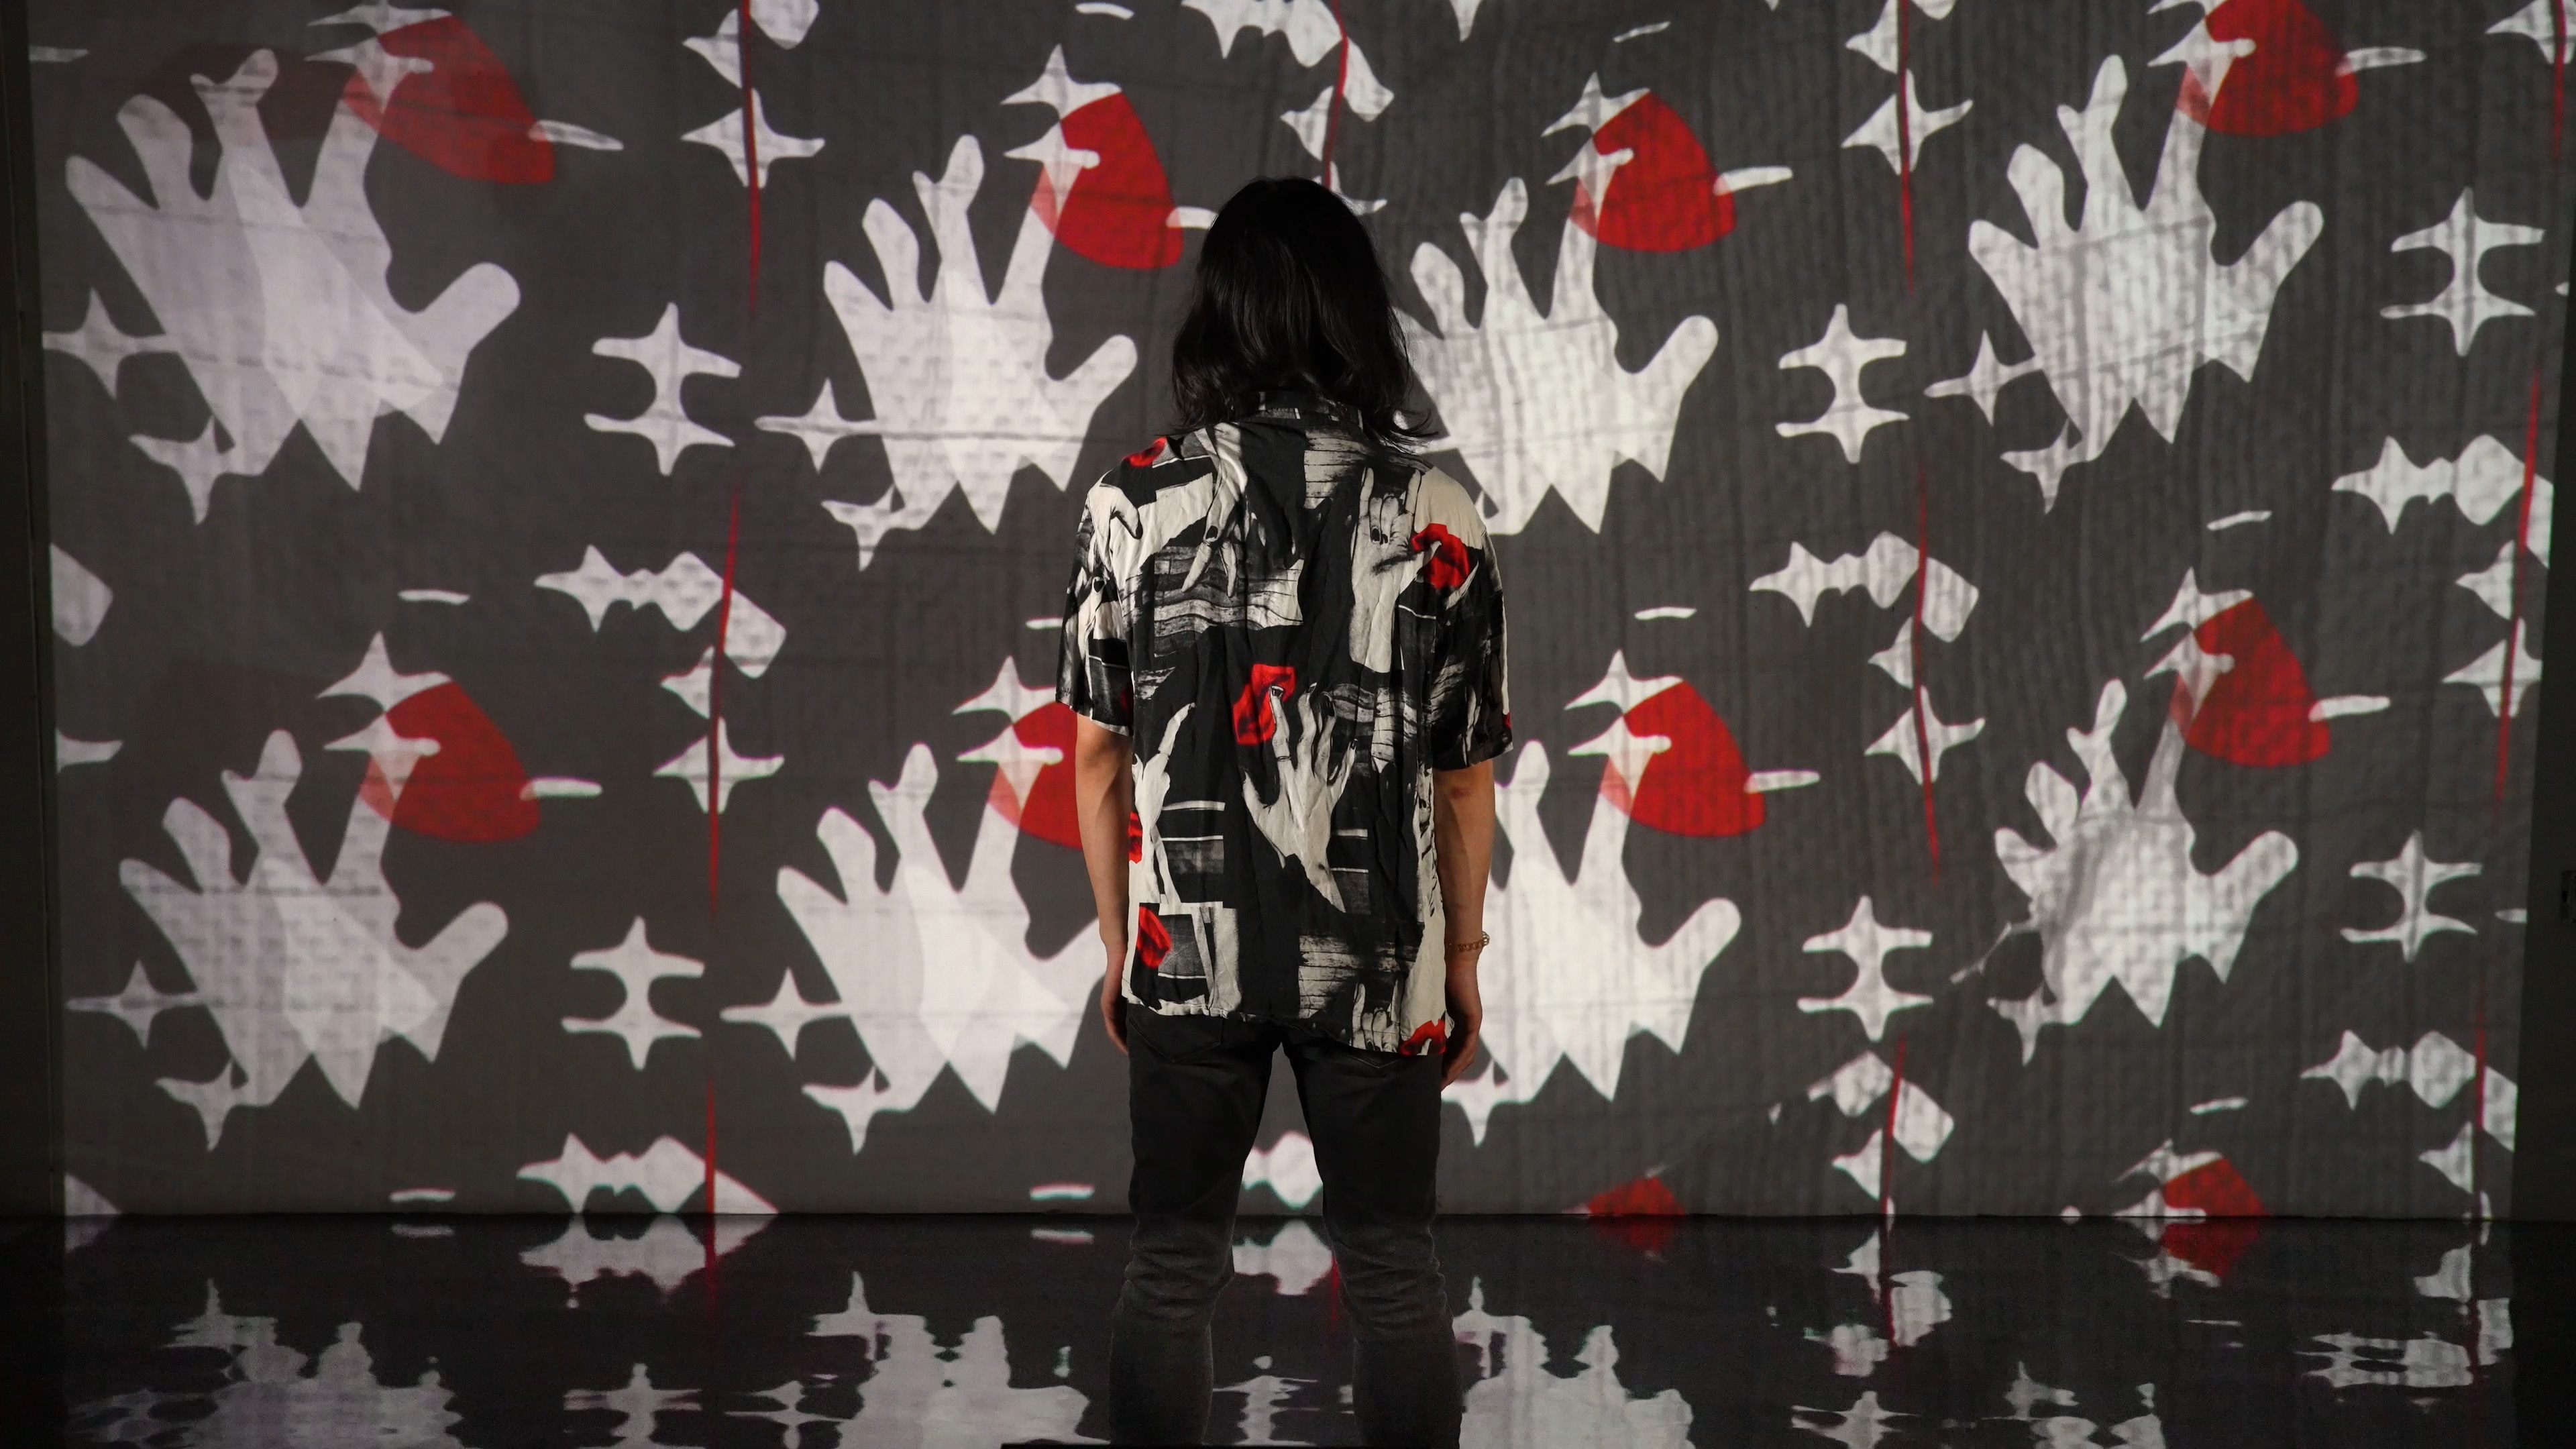 A person in the center of the image is wearing a shirt with a black, white and red pattern. The projection screen in front of the person displays a similar pattern which was generated by stable diffusion, a generative AI.